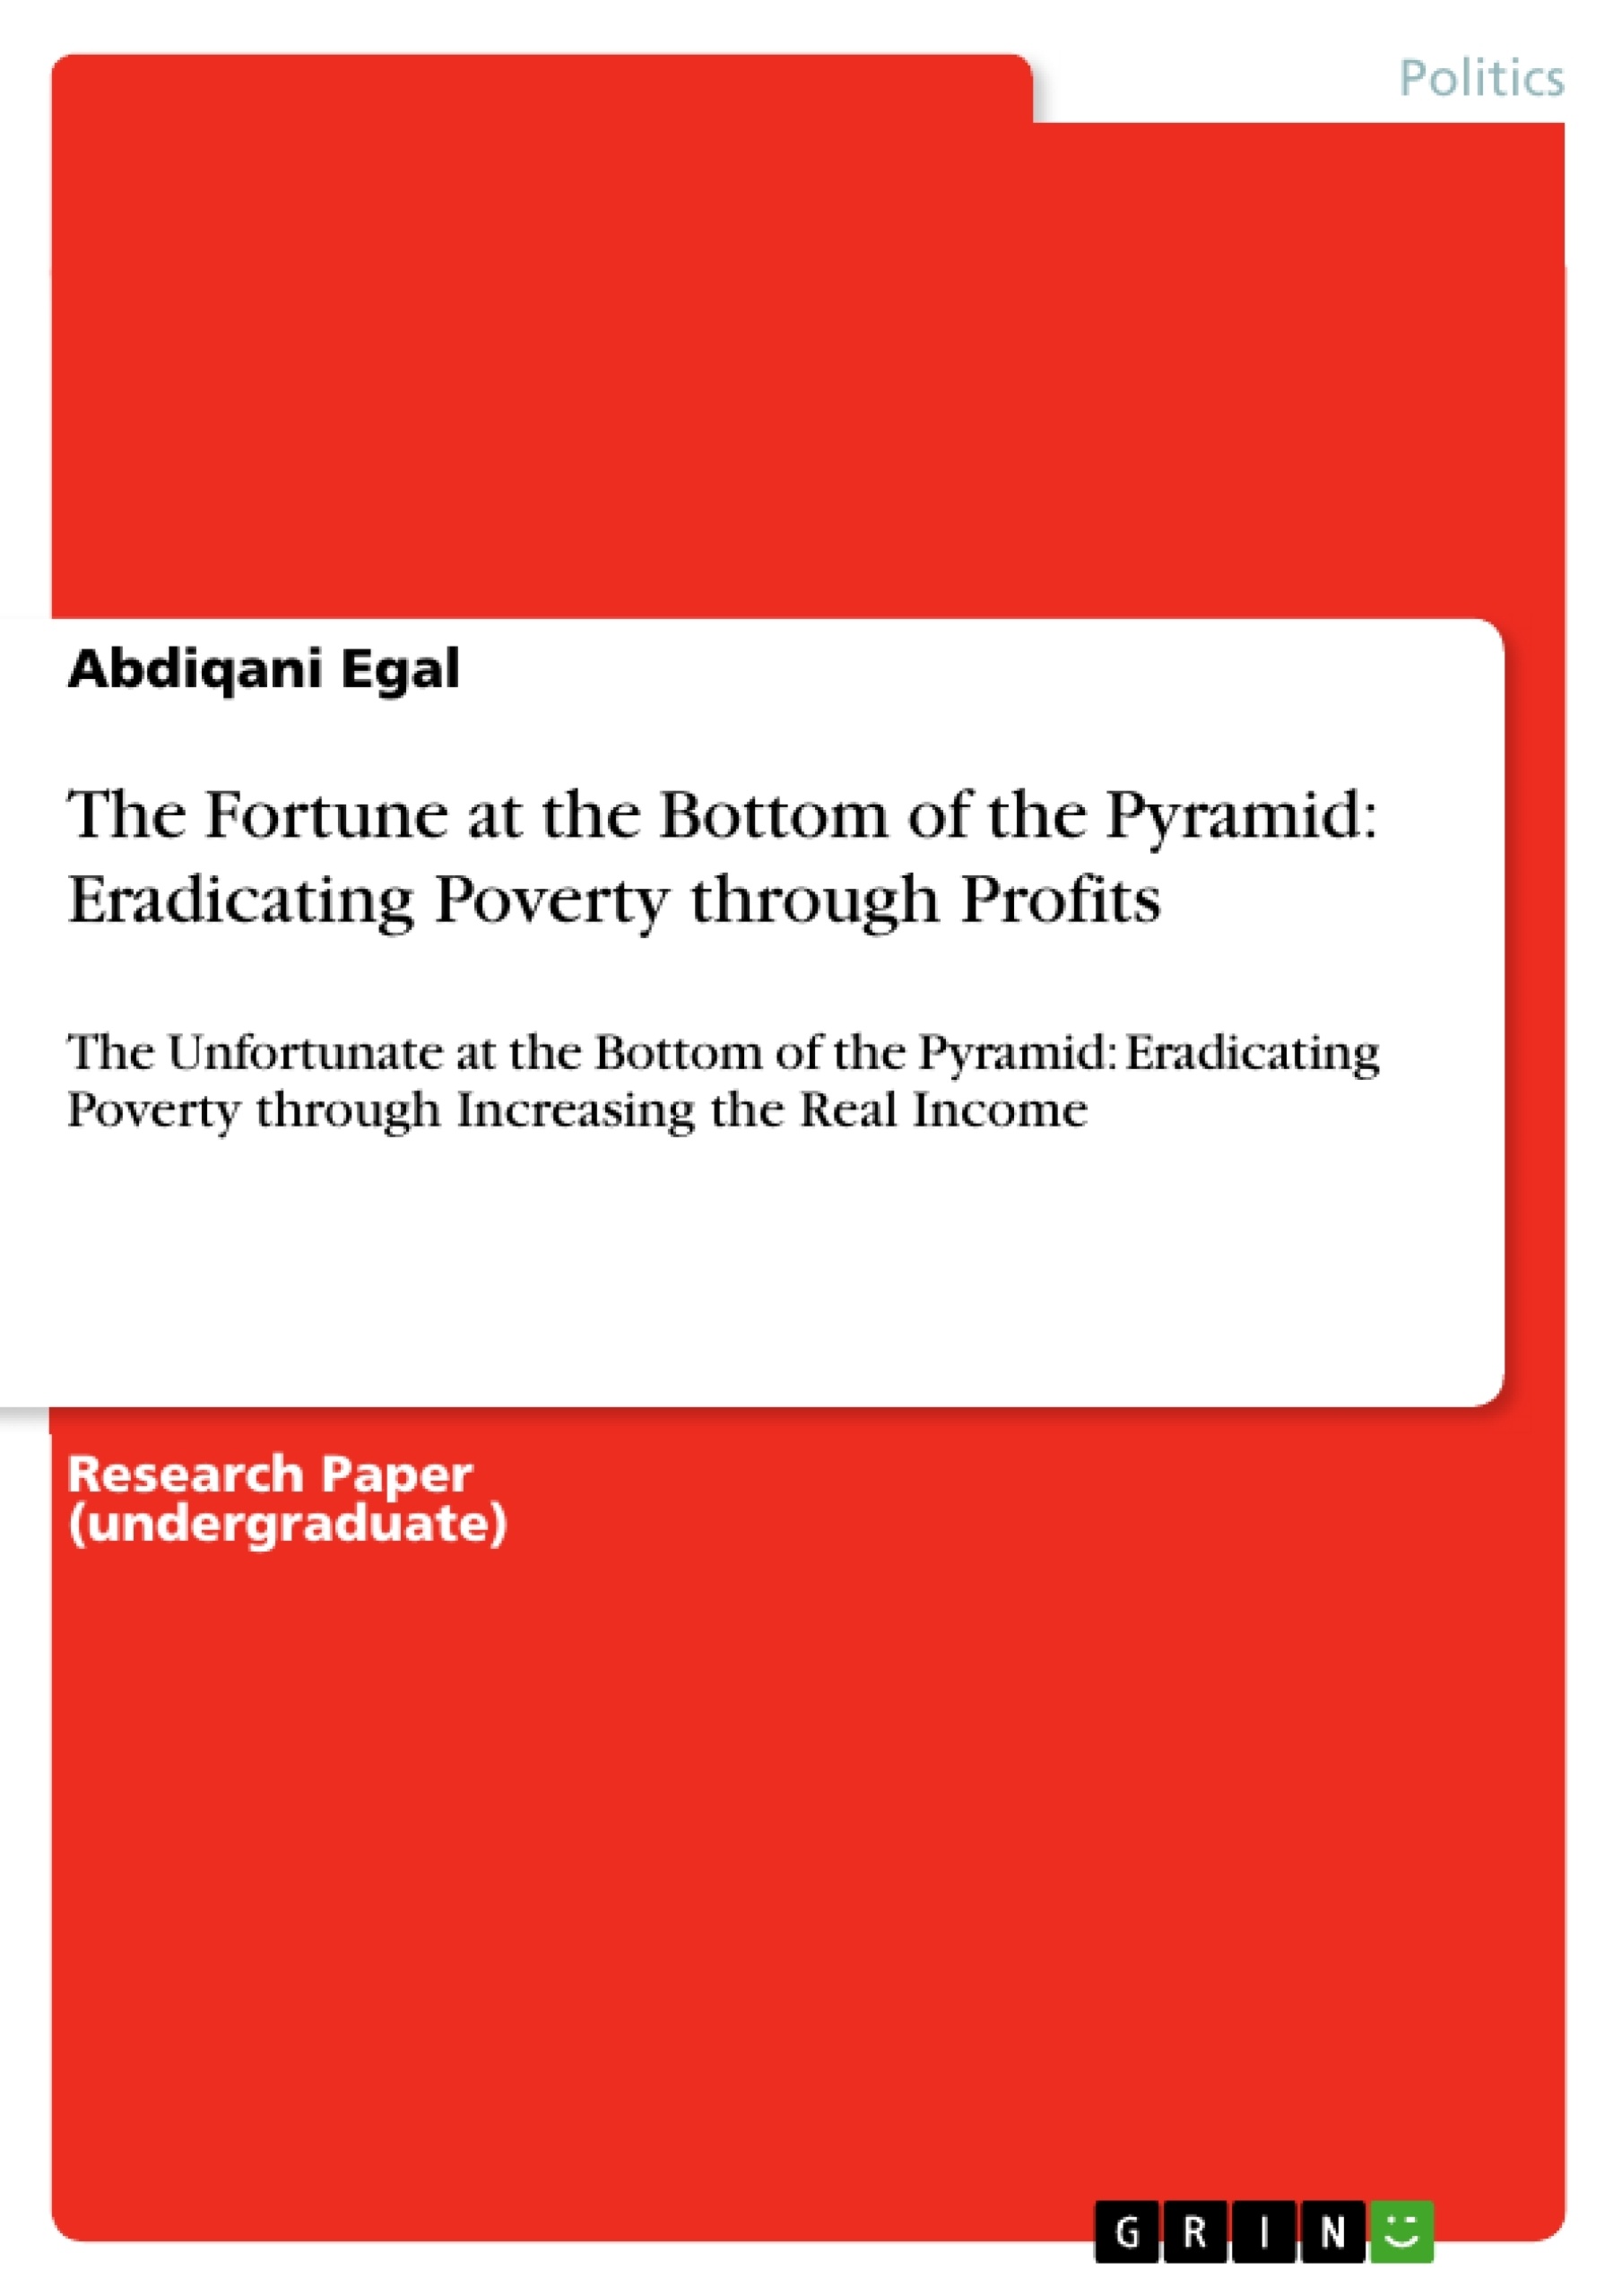 Título: The Fortune at the Bottom of the Pyramid: Eradicating Poverty through Profits